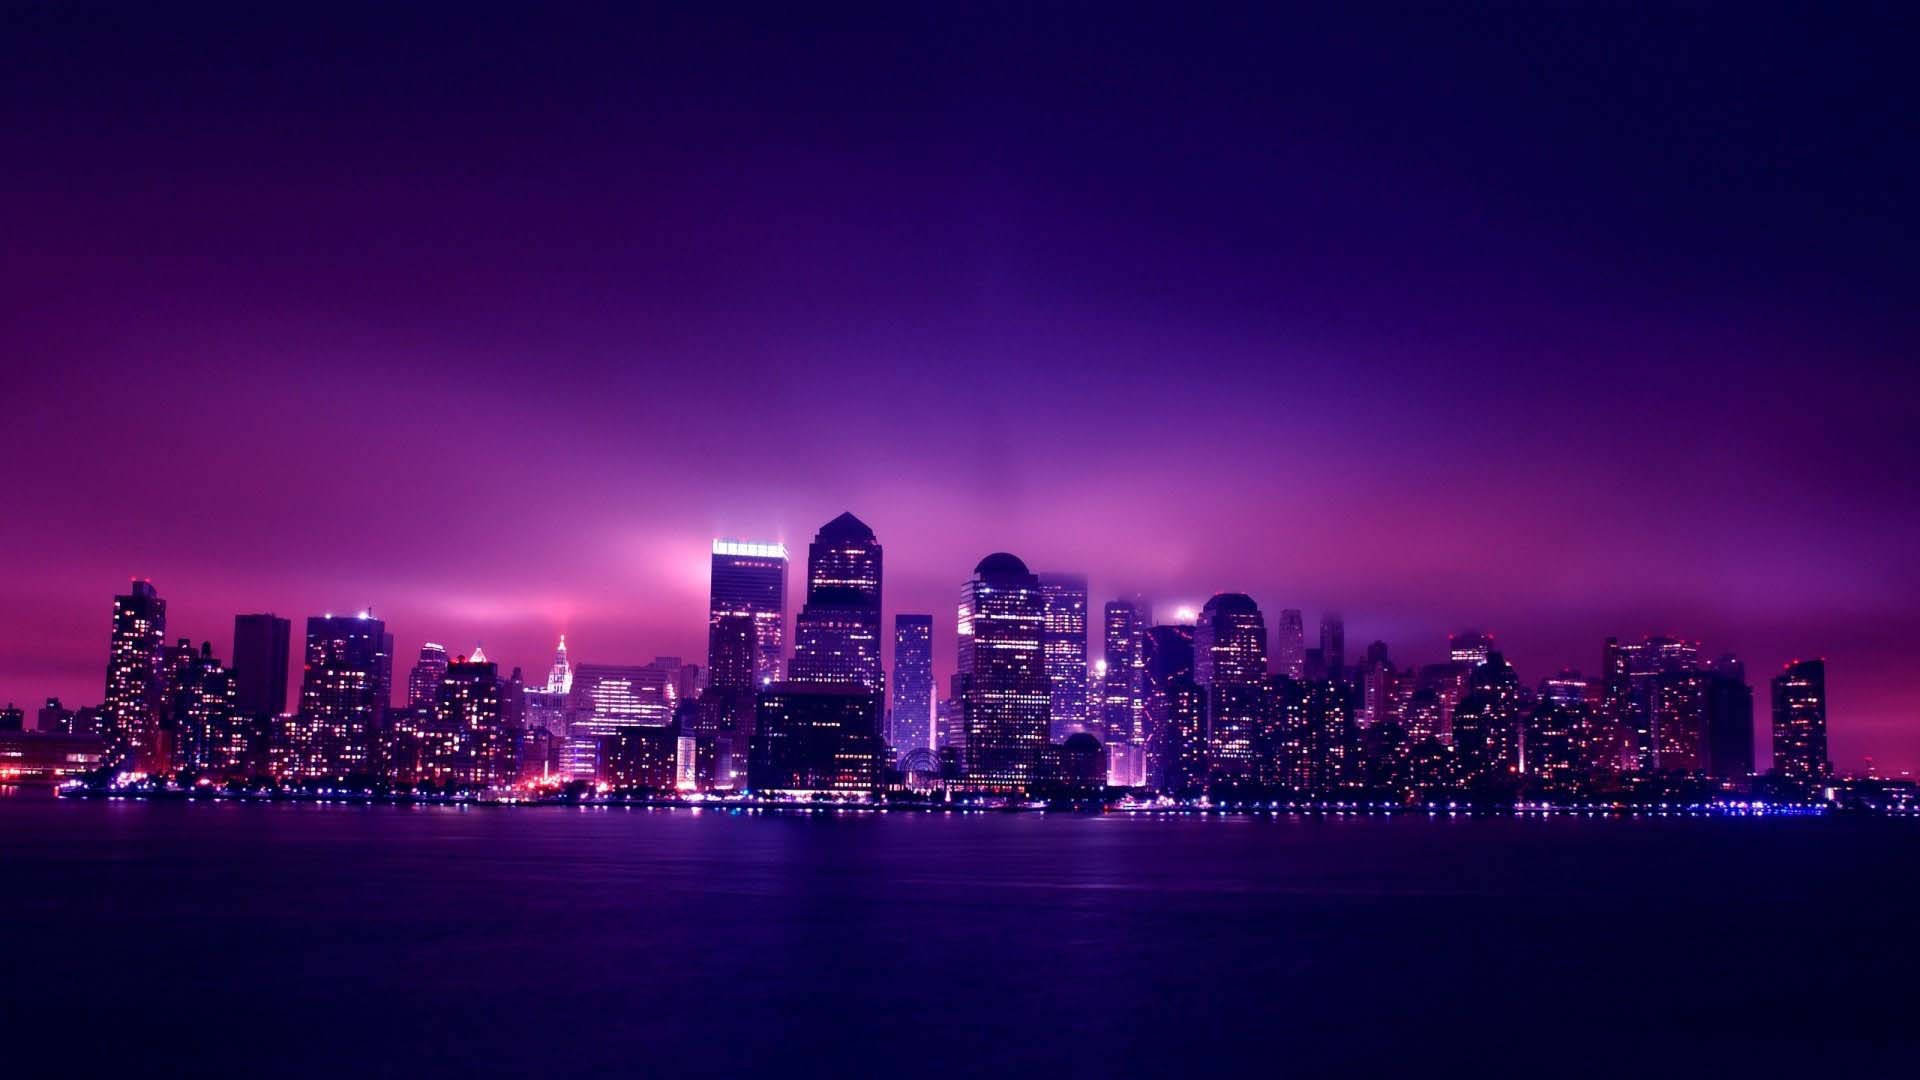 Violet Aesthetic Cityscape At Night Wallpaper